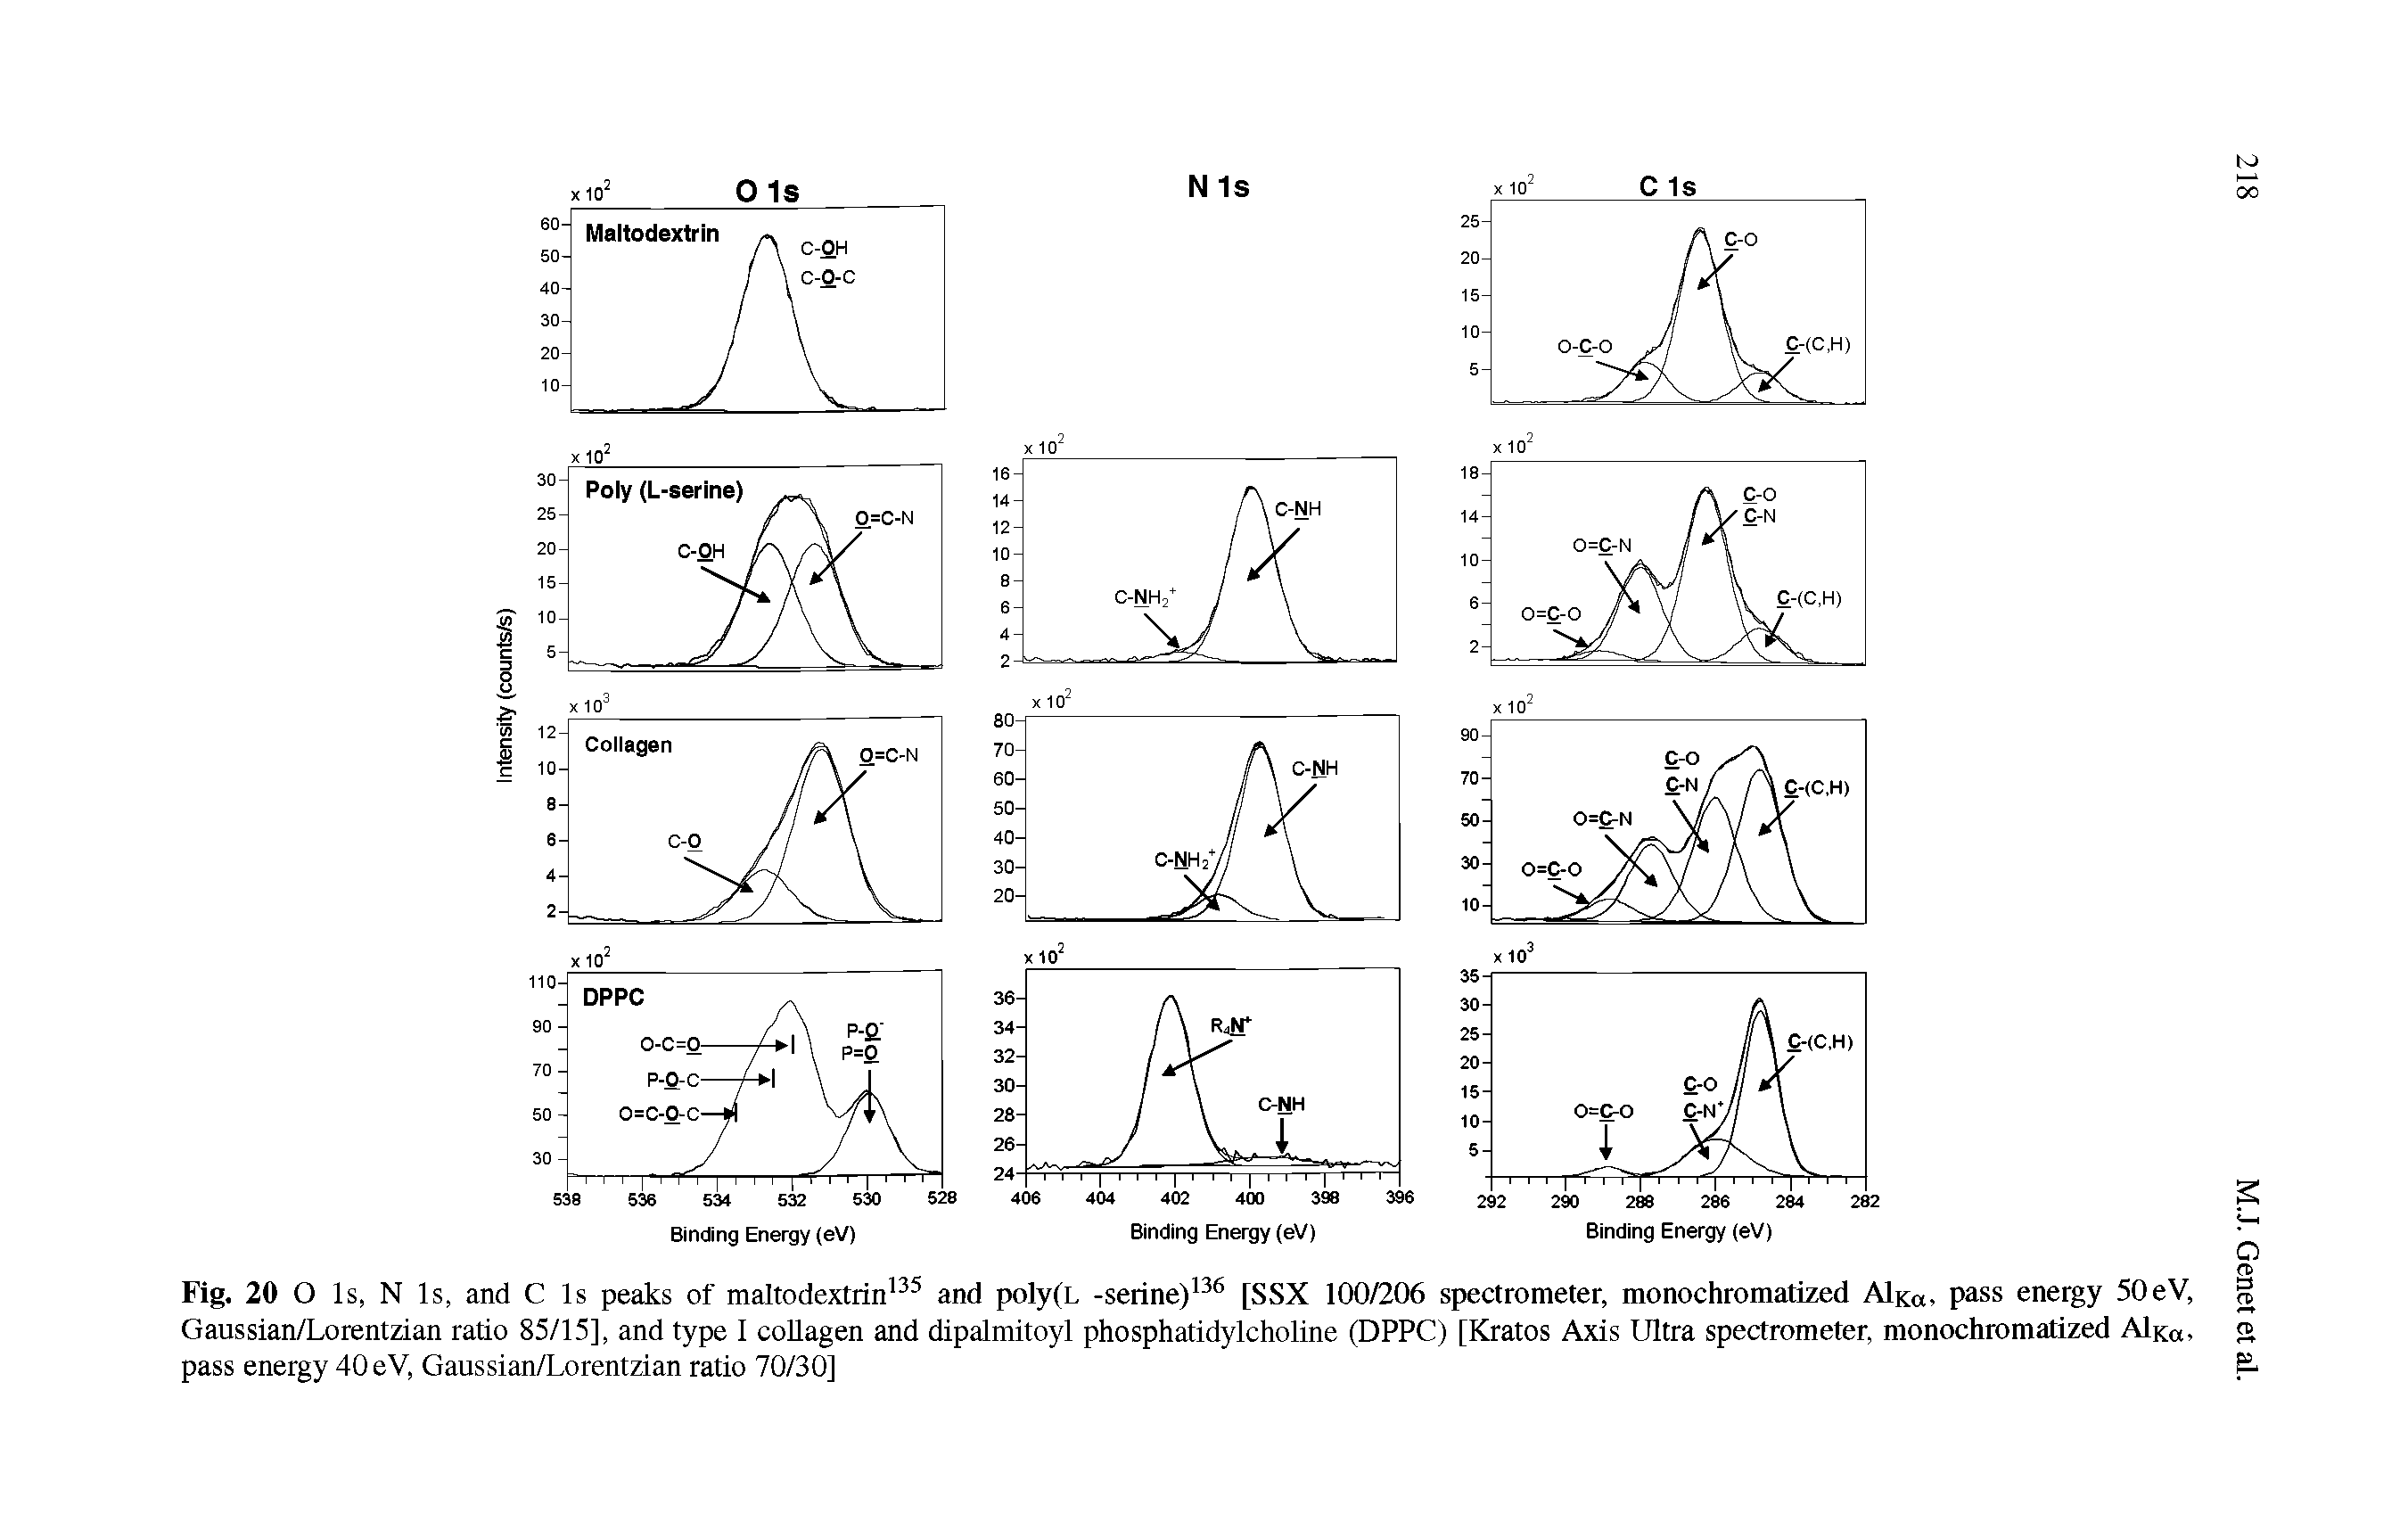 Fig. 20 O Is, N Is, and C Is peaks of maltodextrin and poly(L -serine) [SSX 100/206 spectrometer, monochromatized AIko, pass energy 50eV, Gaussian/Lorentzian ratio 85/15], and type I collagen and dipalmitoyl phosphatidylcholine (DPPC) [Kratos Axis Ultra spectrometer, monochromatized AIro, pass energy 40 eV, Gaussian/Lorentzian ratio 70/30]...